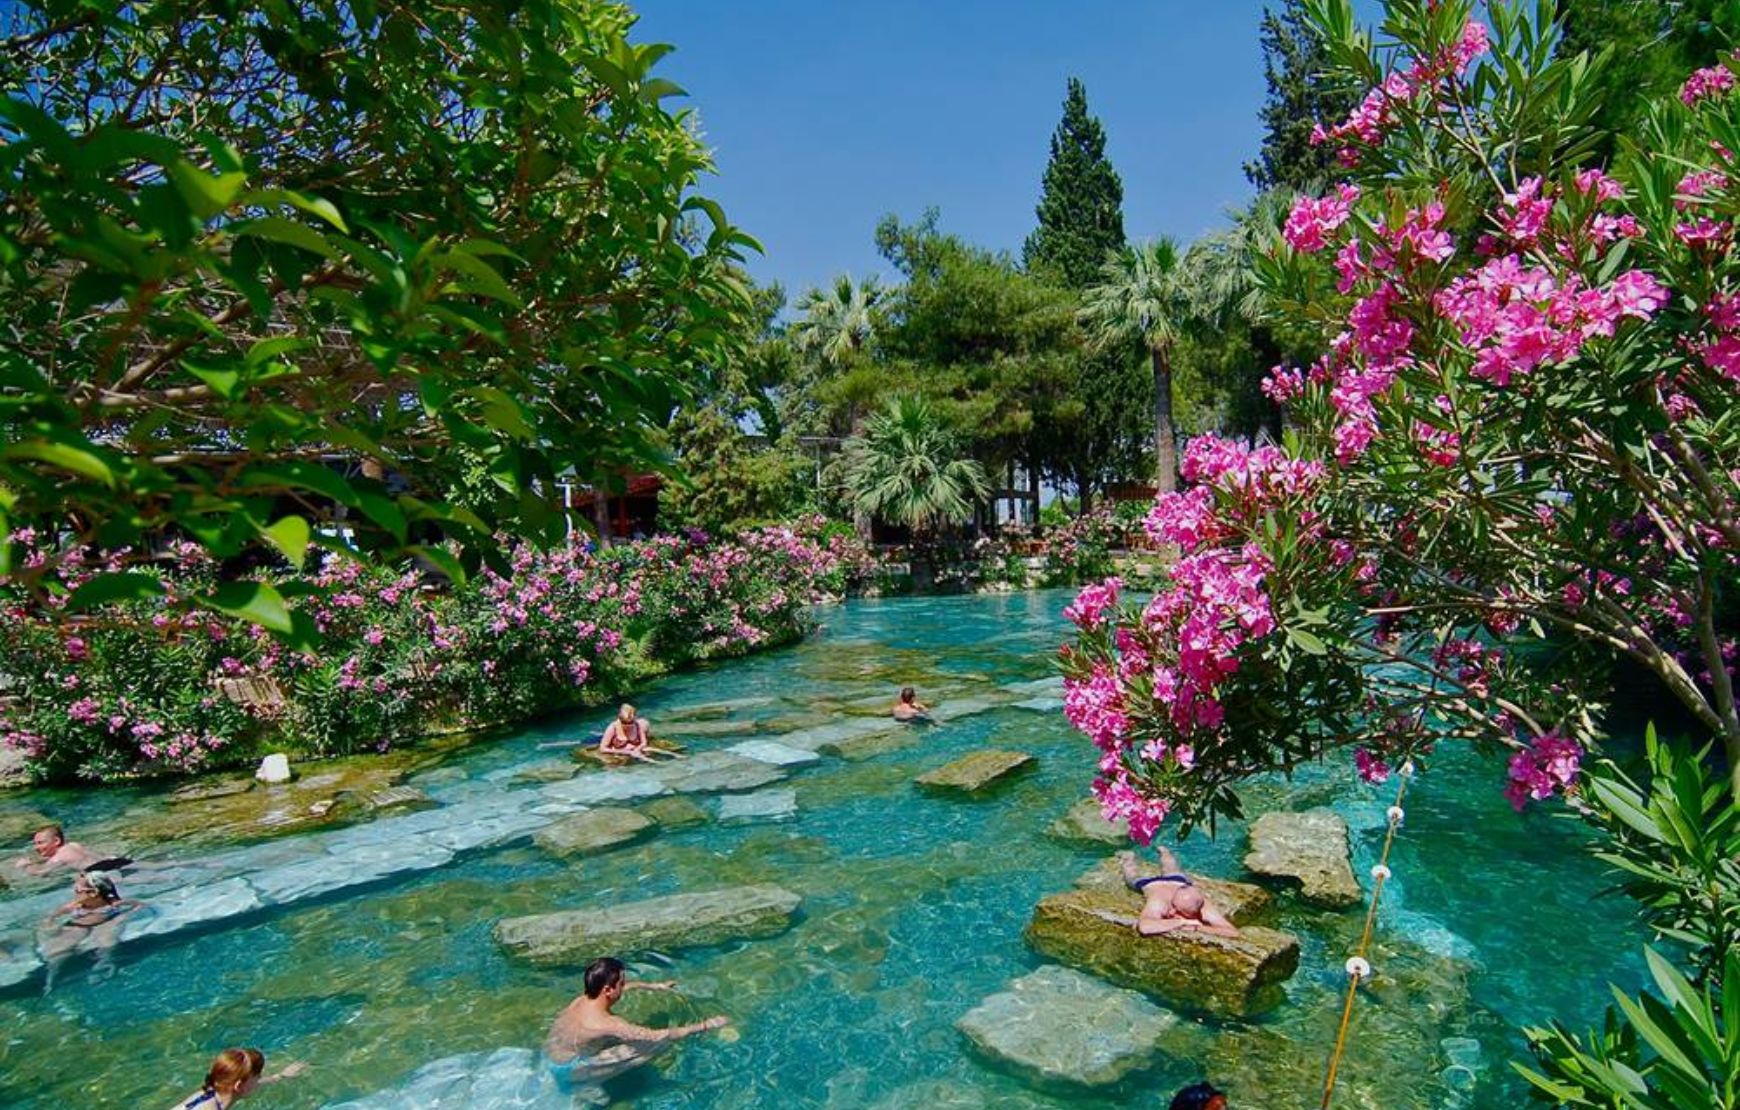 Cleopatra's pool in Pamukkale